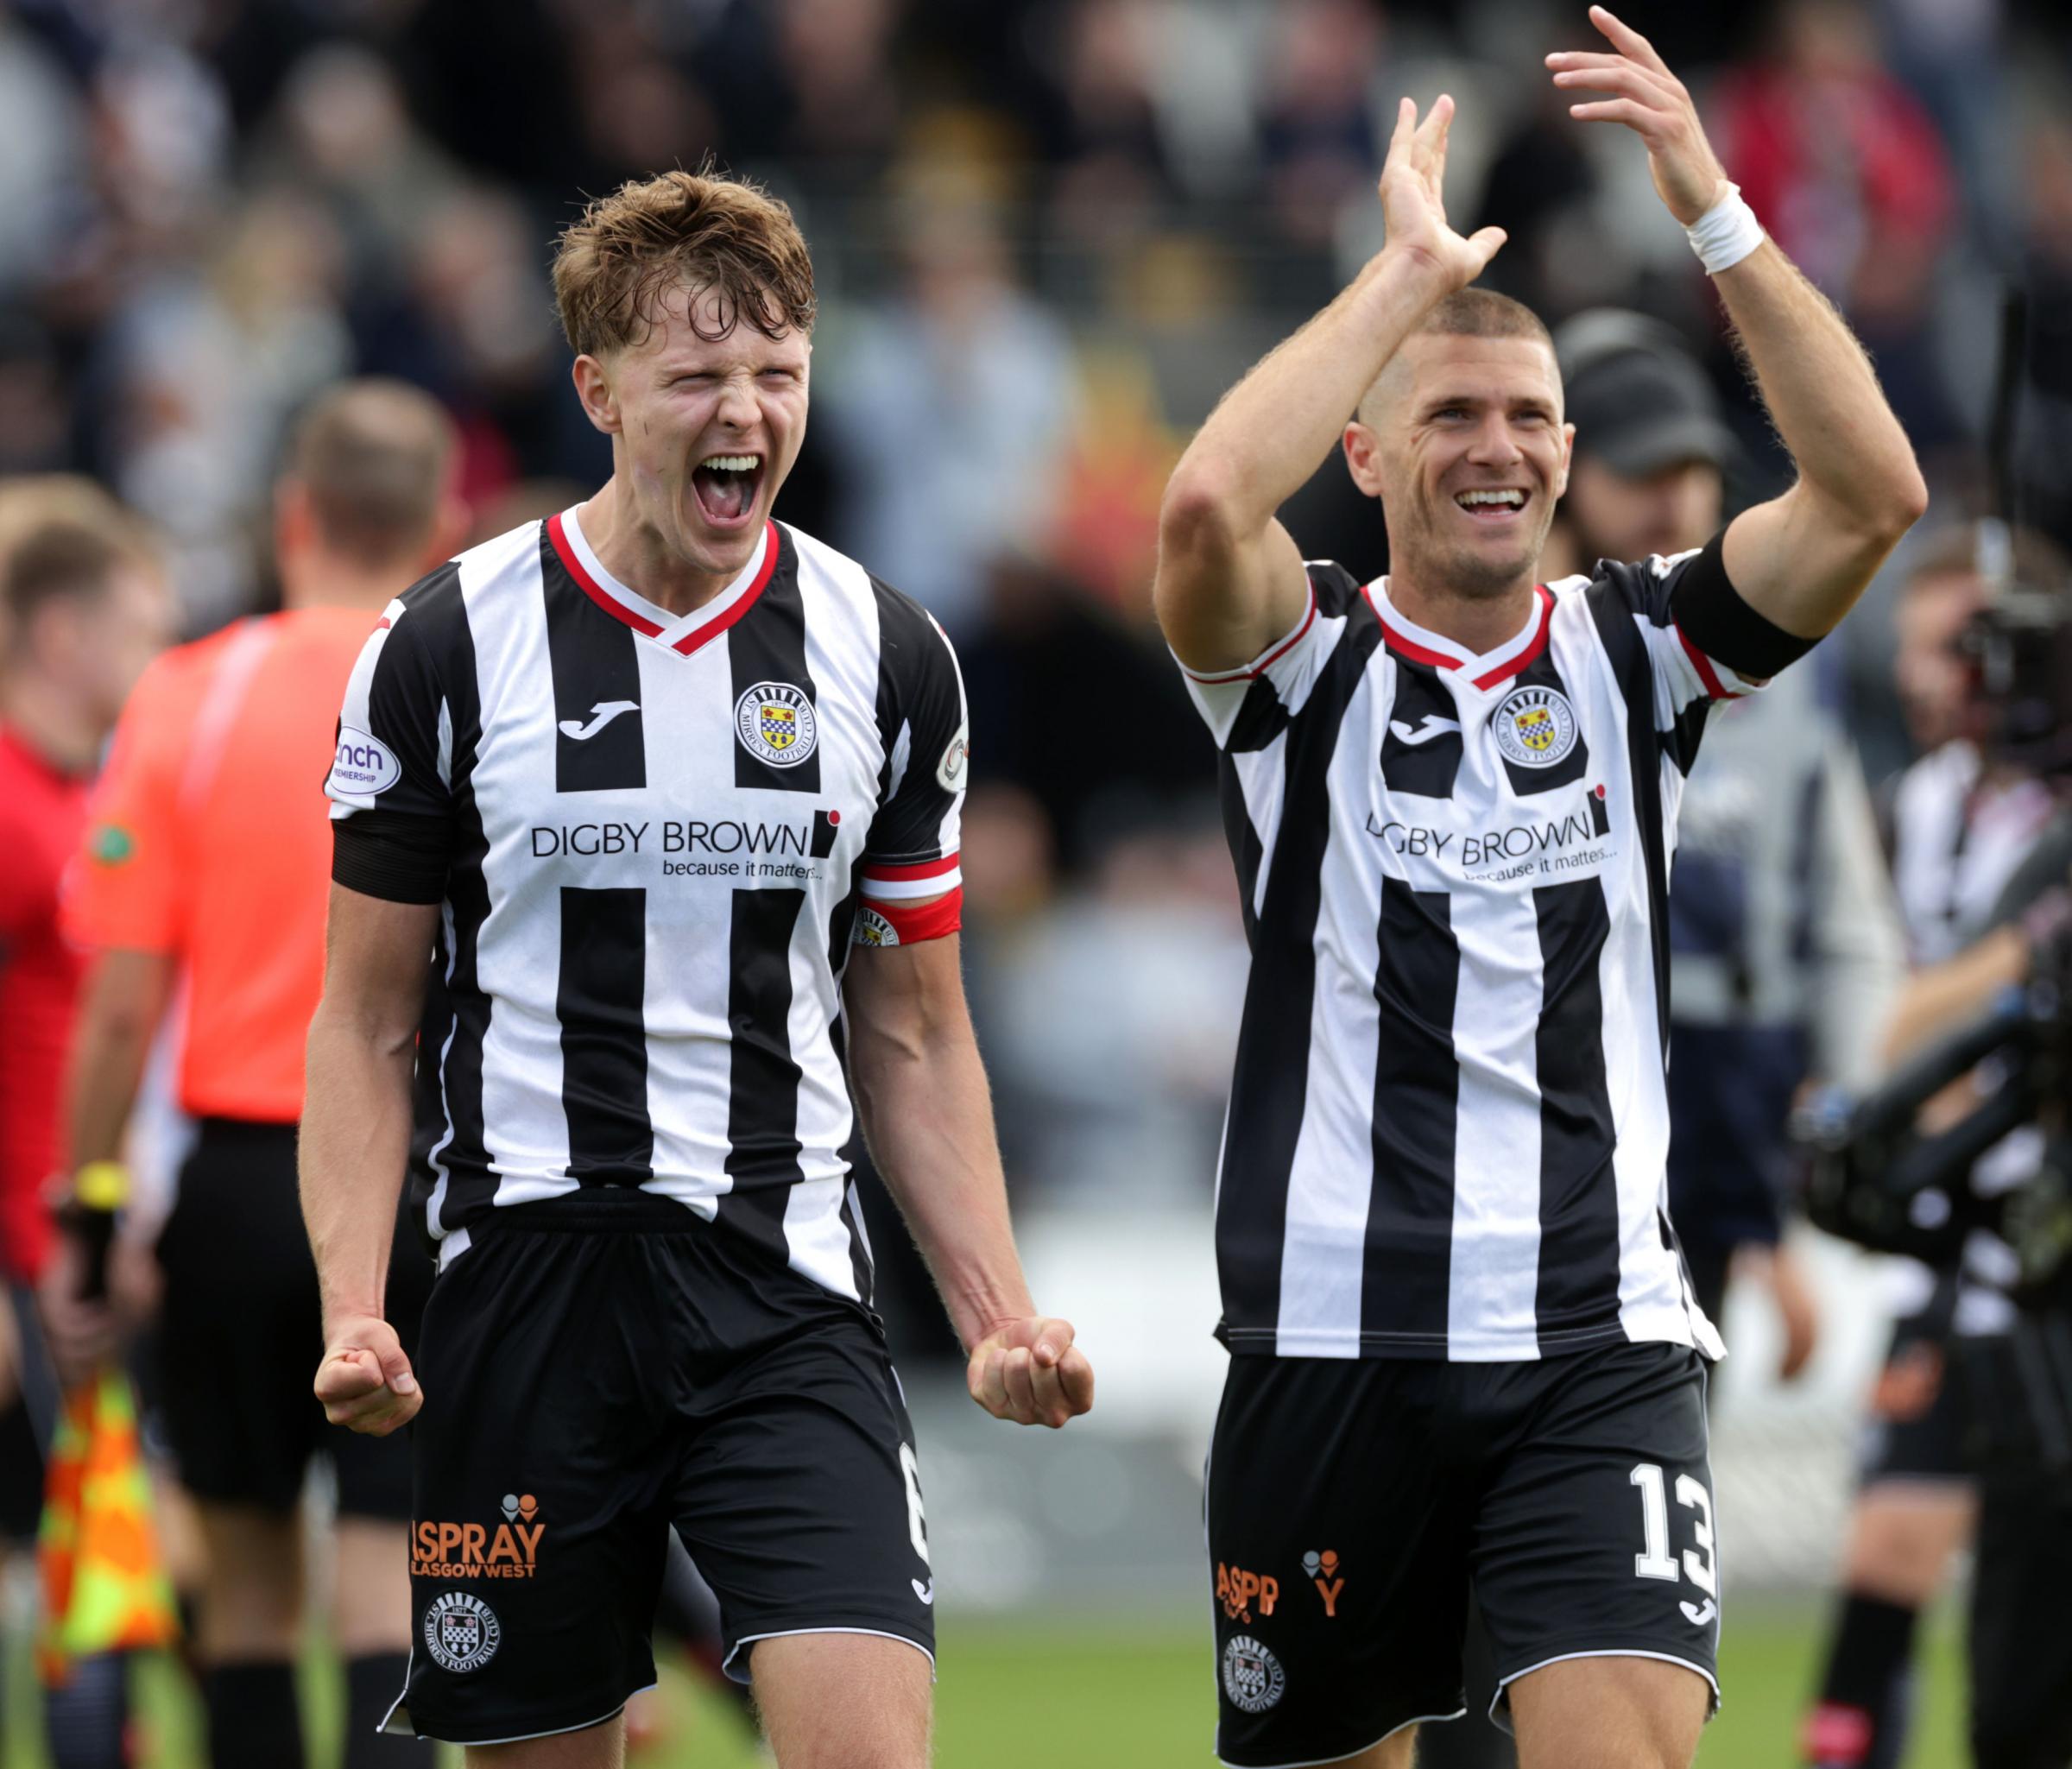 St Mirren could tell early on against Celtic they were in line for a ‘special day’, says Mark O’Hara